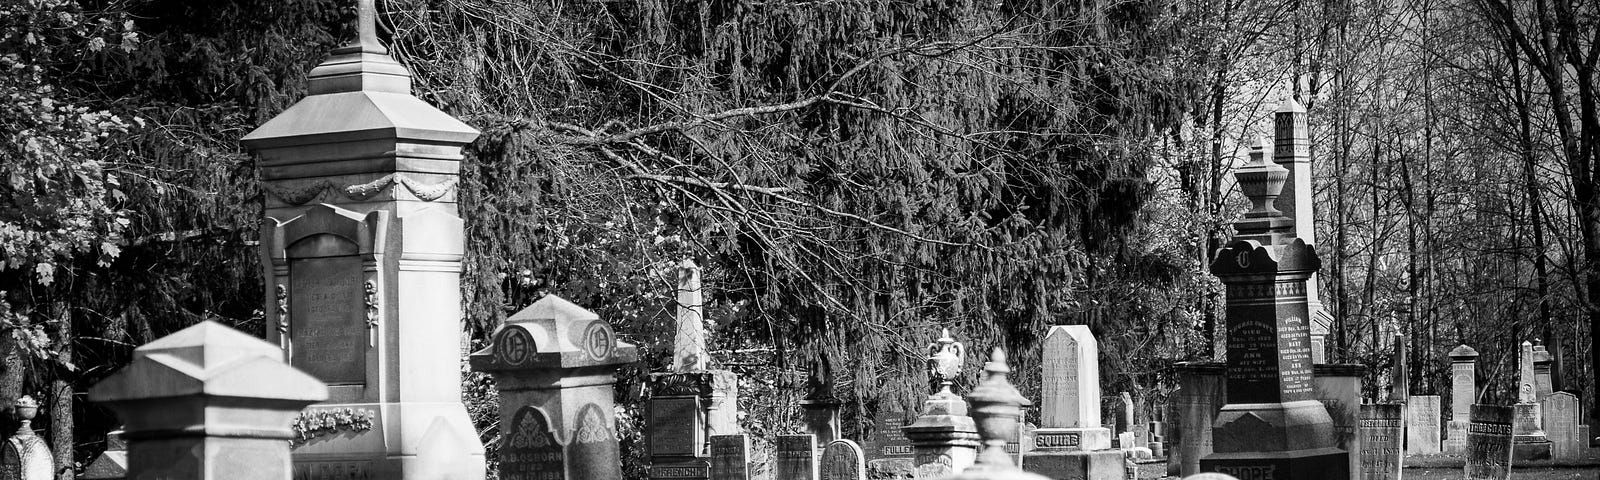 cemetery with white stones in a black and white photograph